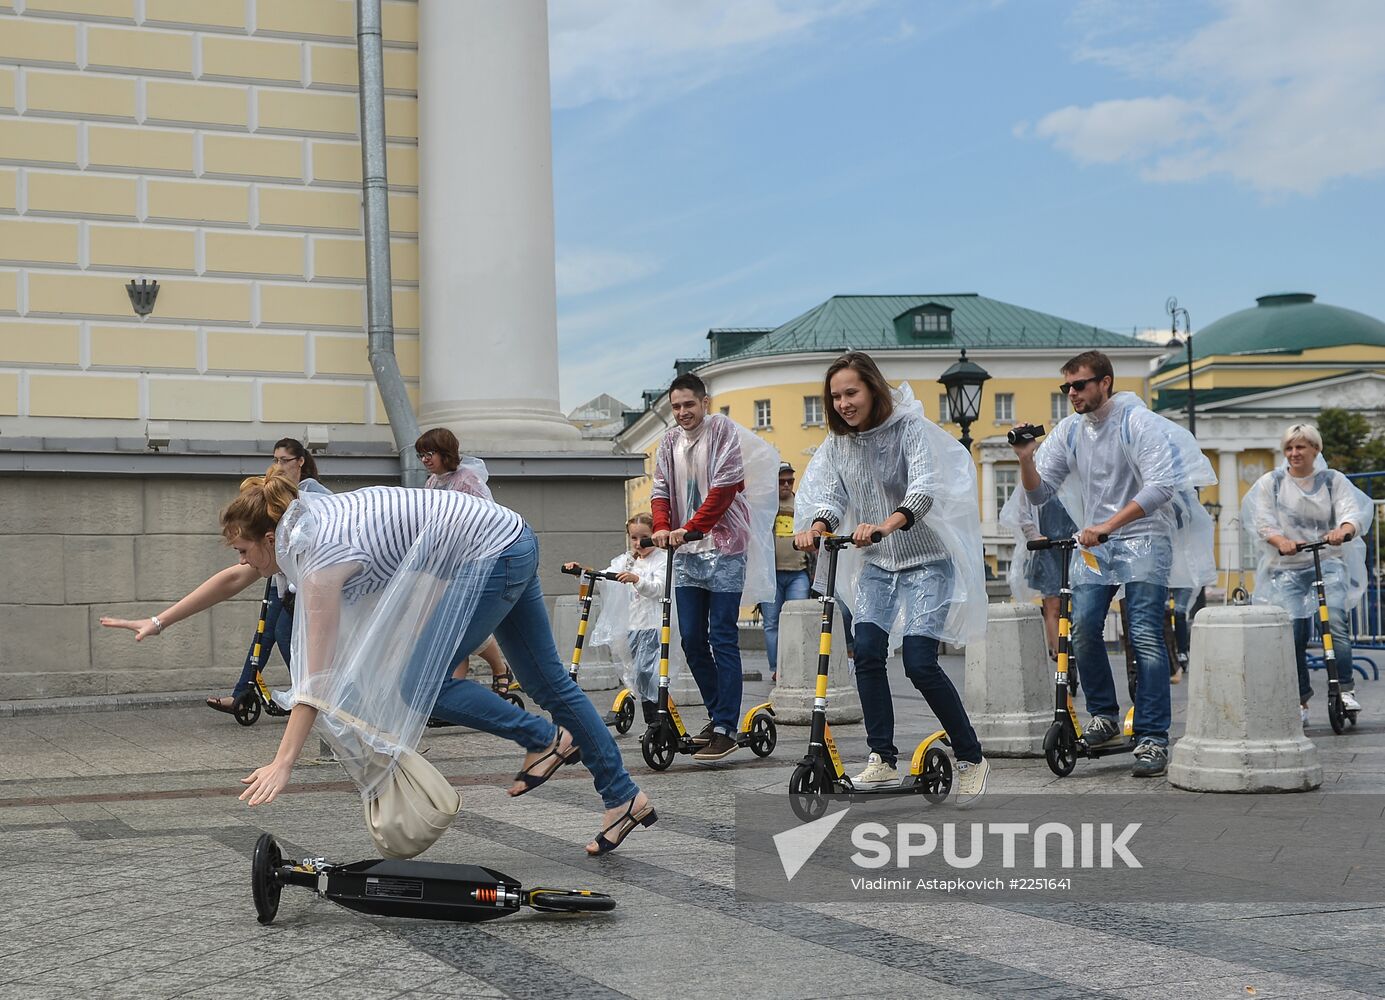 Kick scooter routes opened in Moscow's historic center